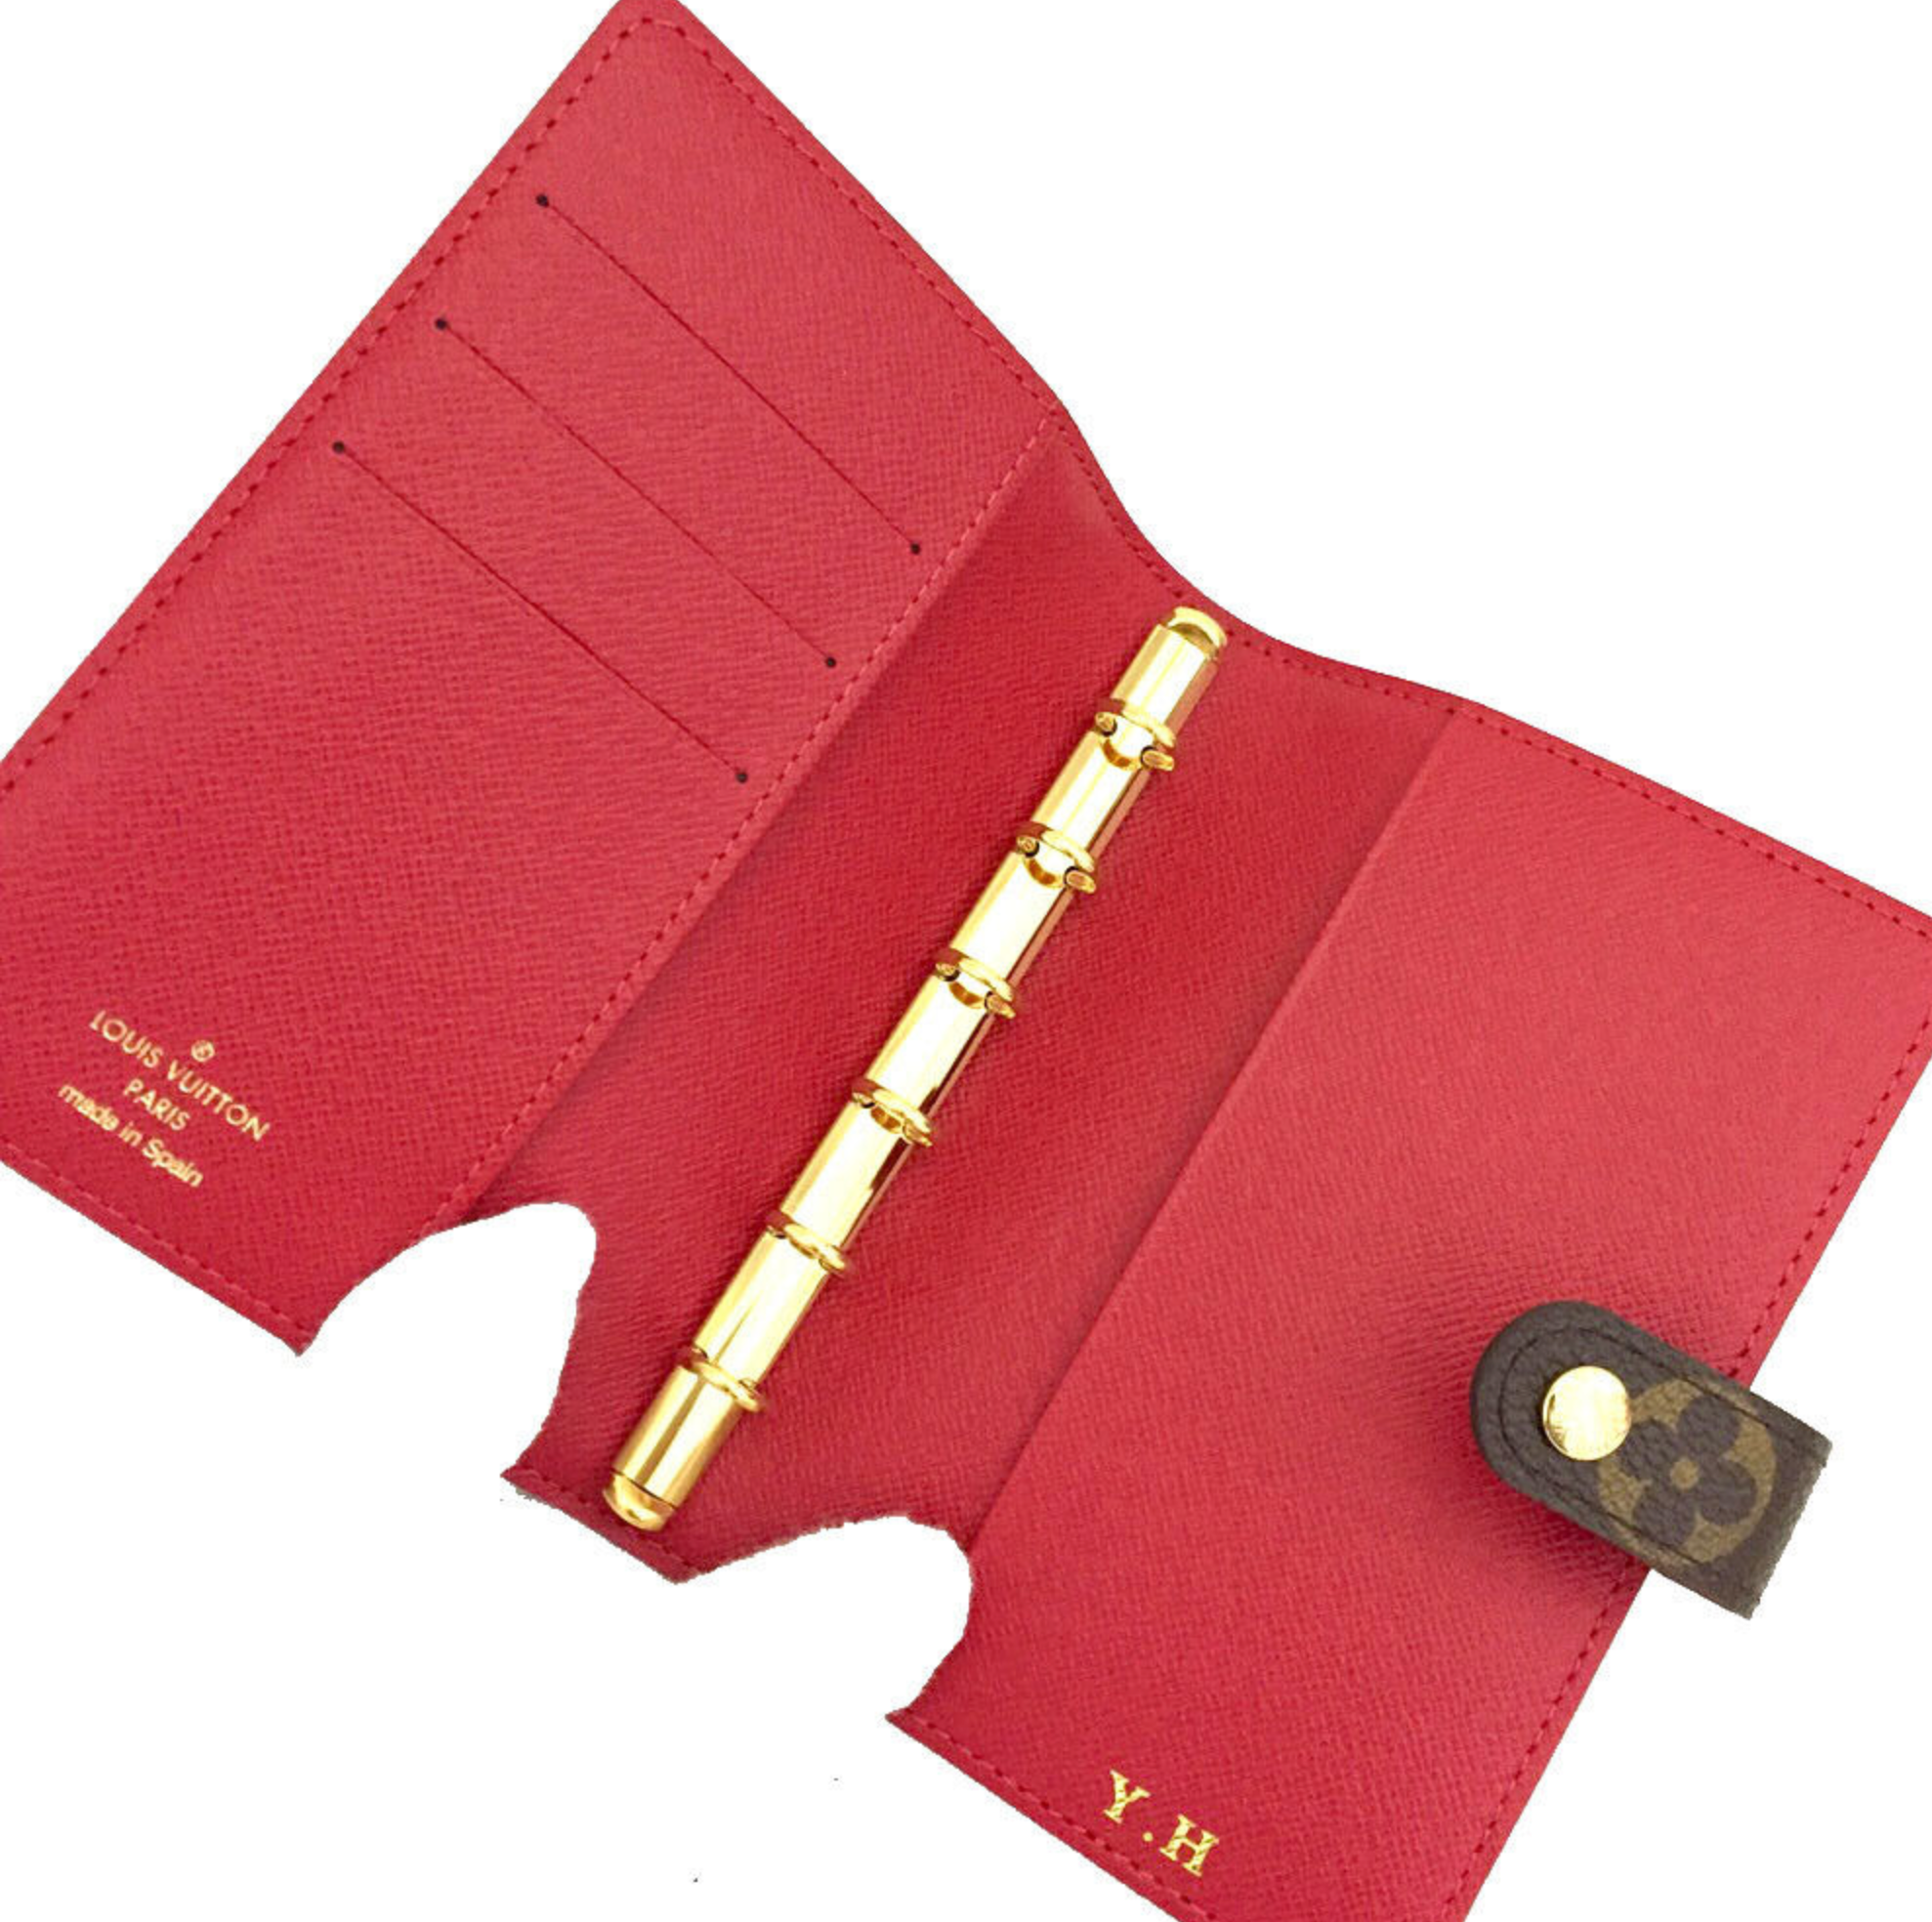 LIMITED EDITION Louis Vuitton Monogram Trunks Agenda PM Day Planner Cover CA3078 030623